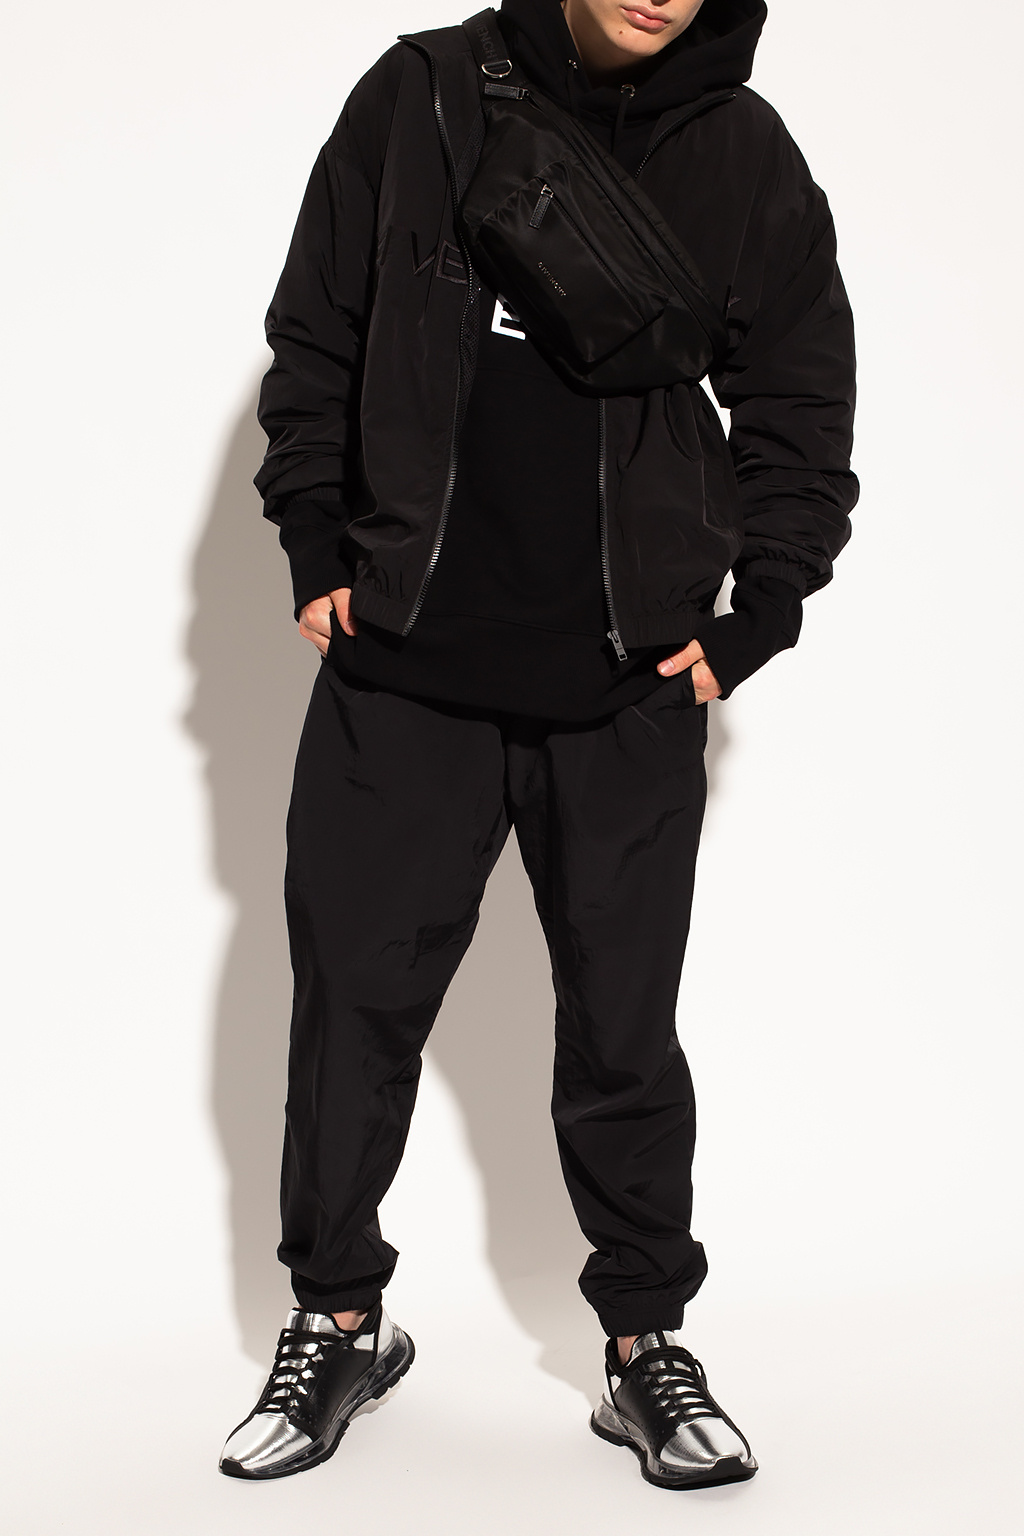 Givenchy - Slim-Fit Tapered Logo-Embroidered Tech-Jersey Track Pants -  Black Givenchy